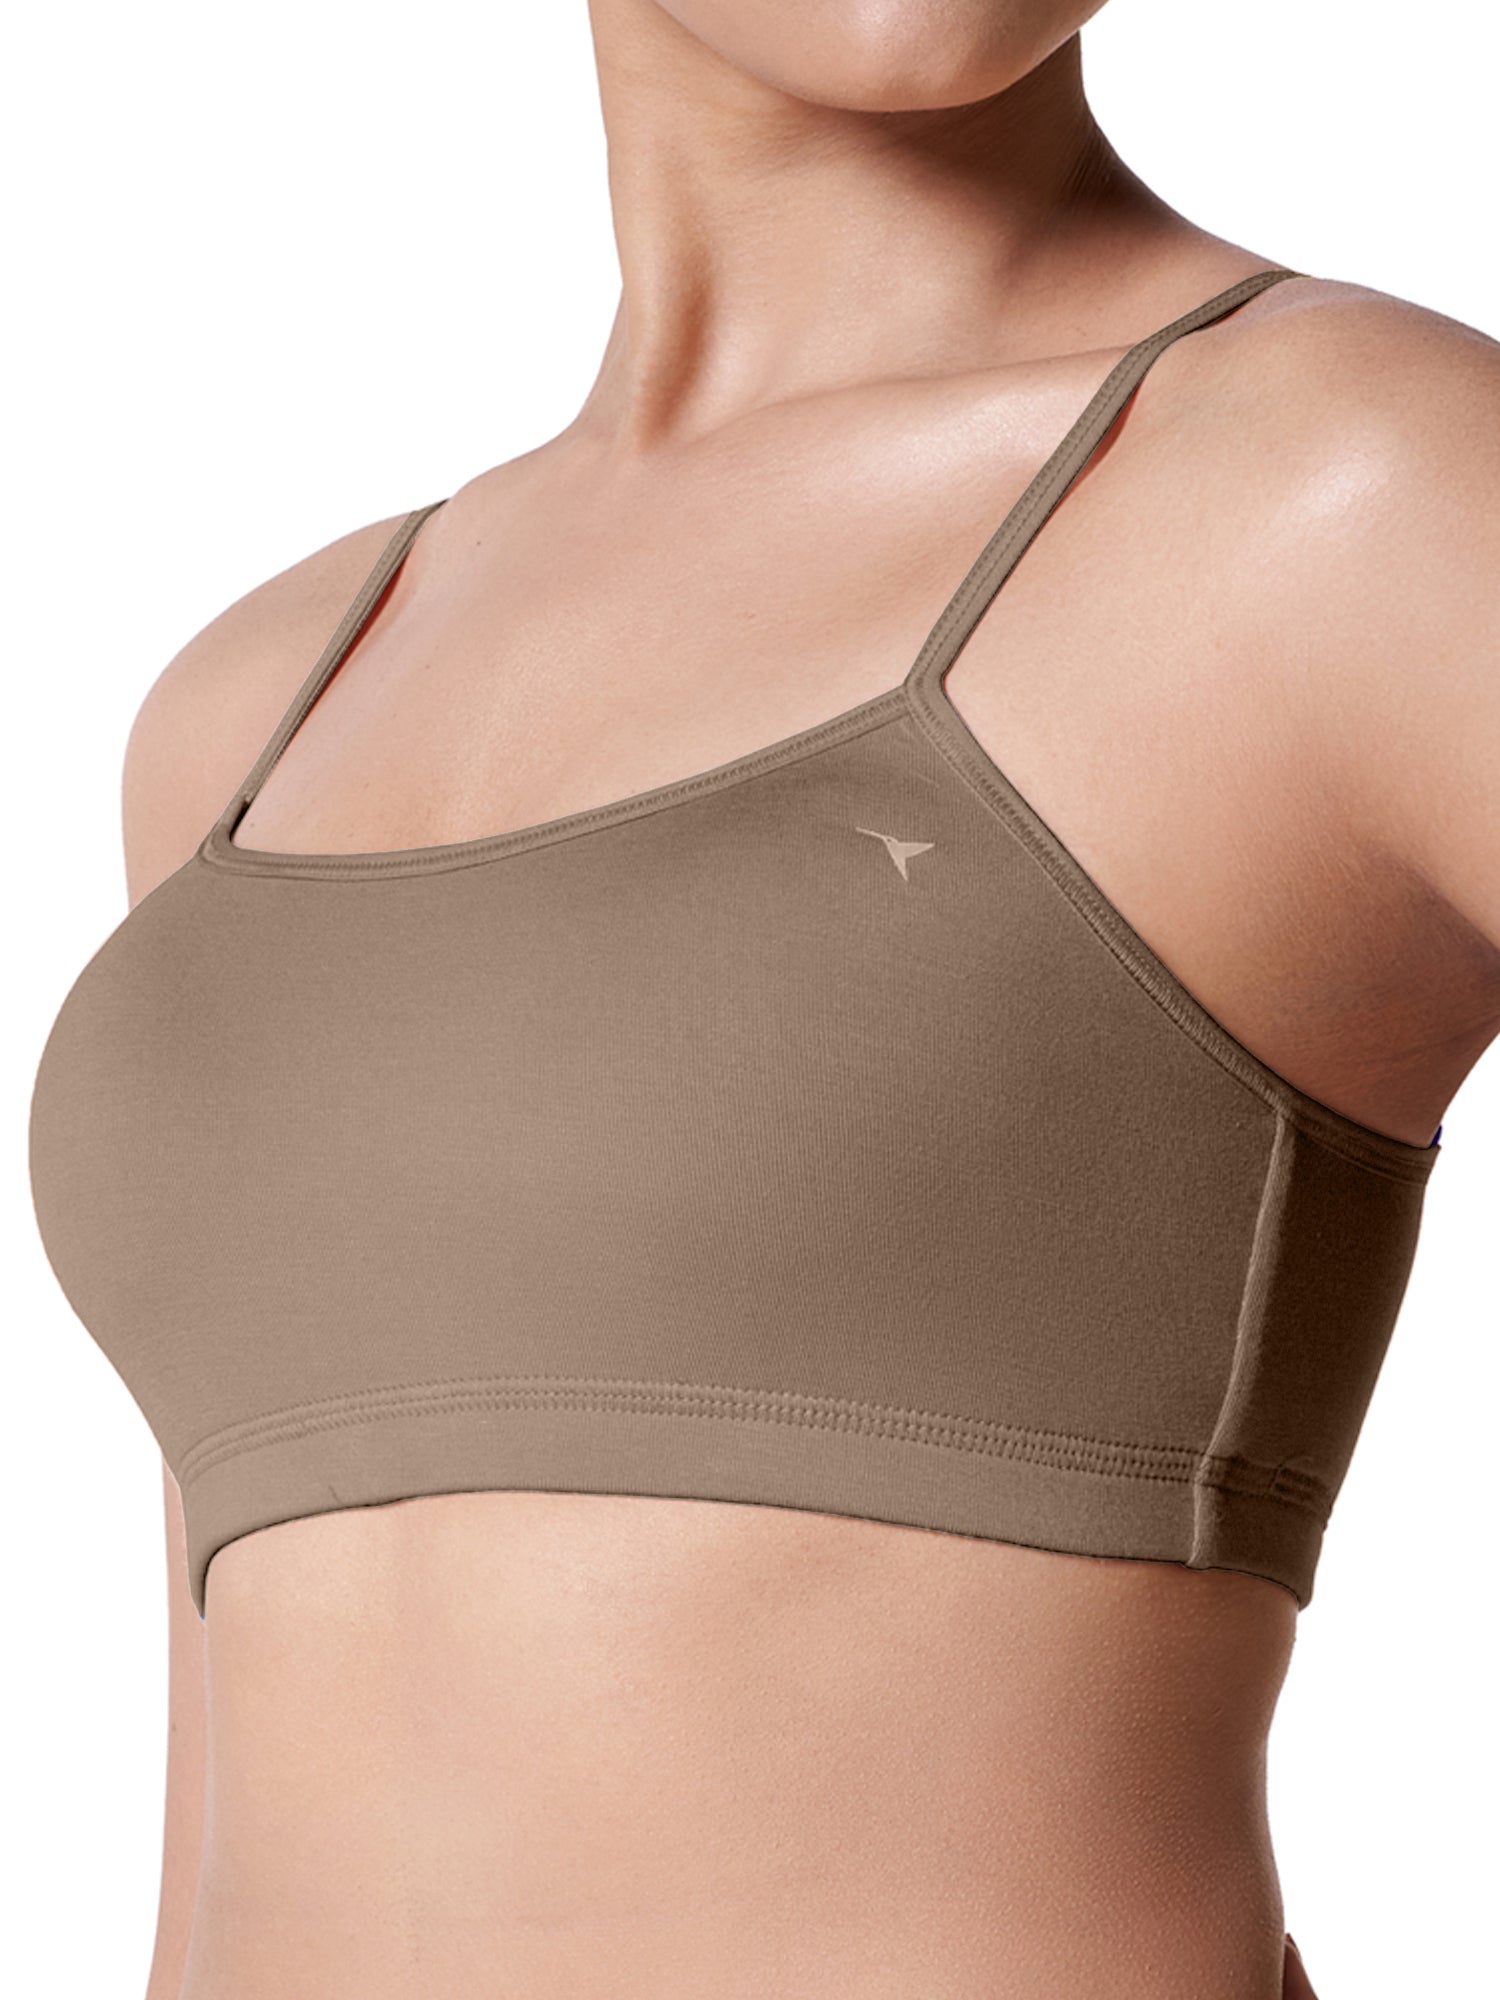 blossom-starters bra-camel brown1-teen collection